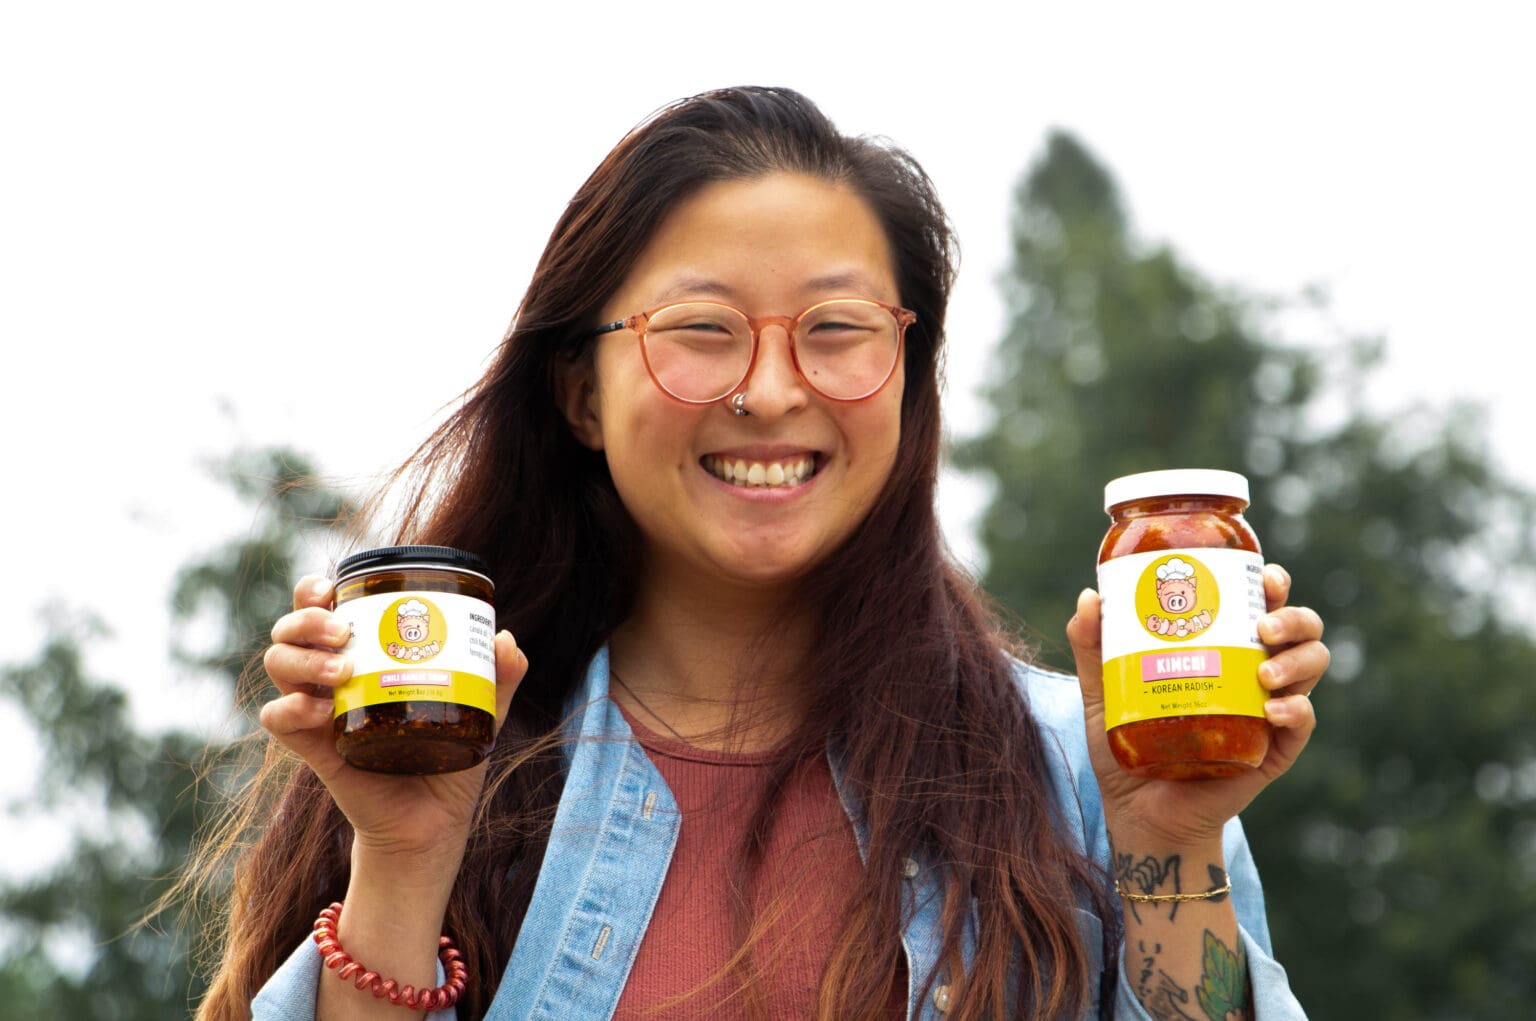 Rika Wong, the founder of Buu Chan Asian foods, shows off her homemade jars filled with kimchi products.